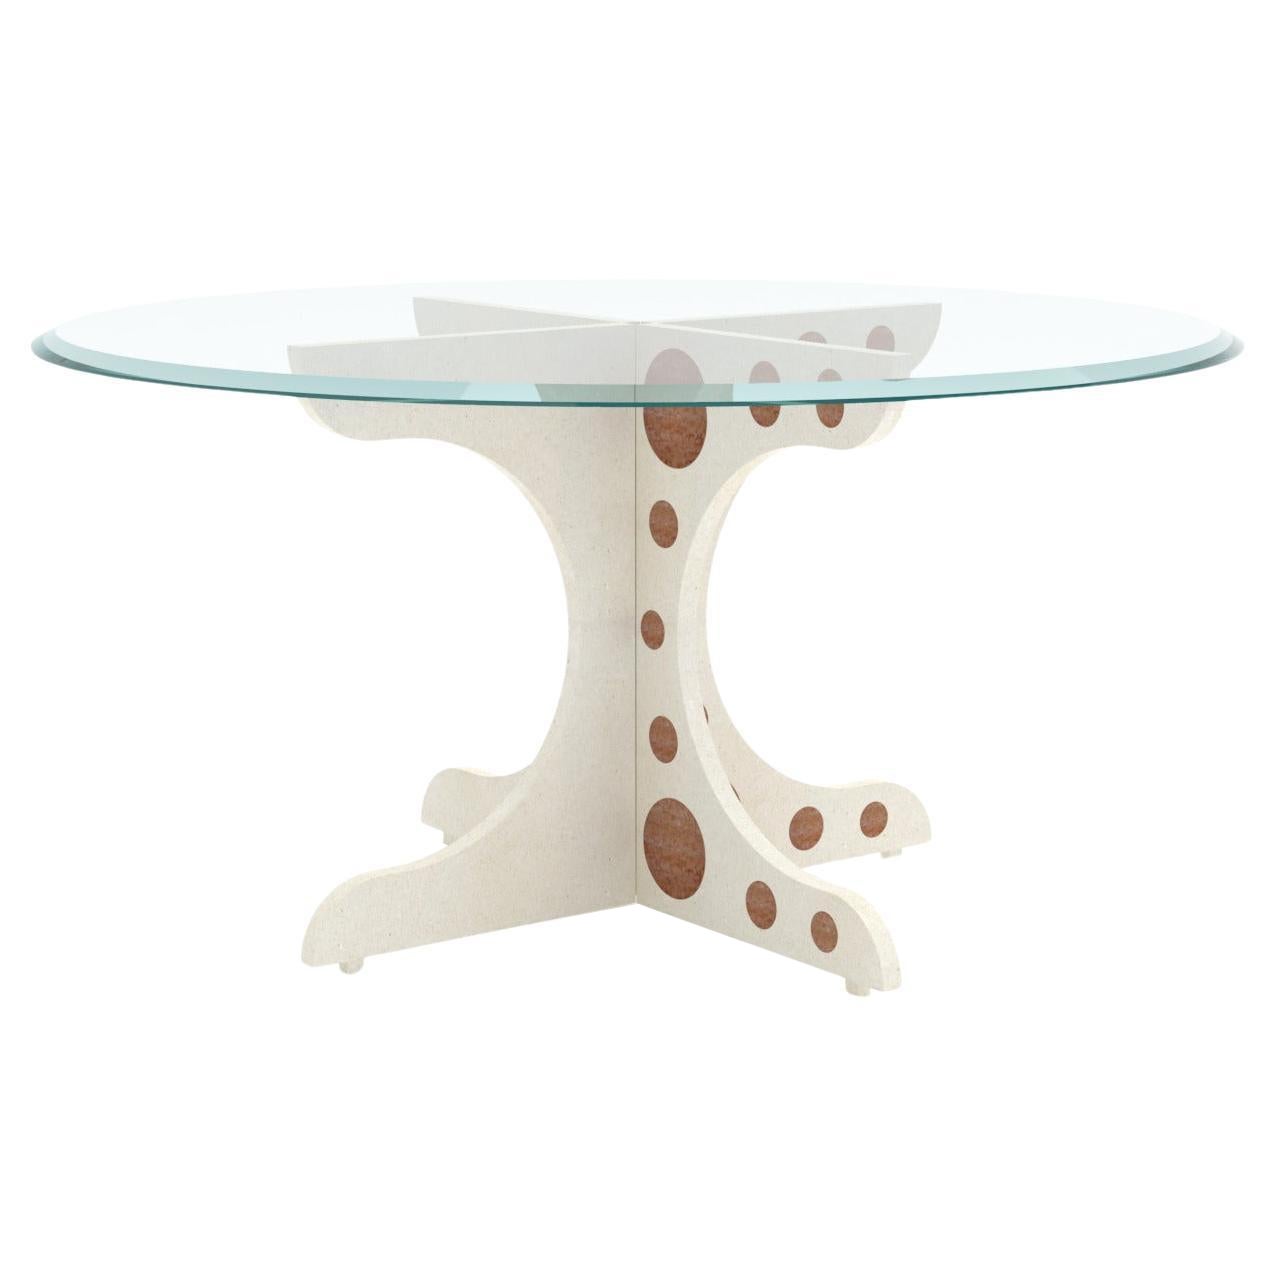 Ma-Mi, 21st Century Veselye Marble and Glass Round Coffee Table - Filling holes For Sale